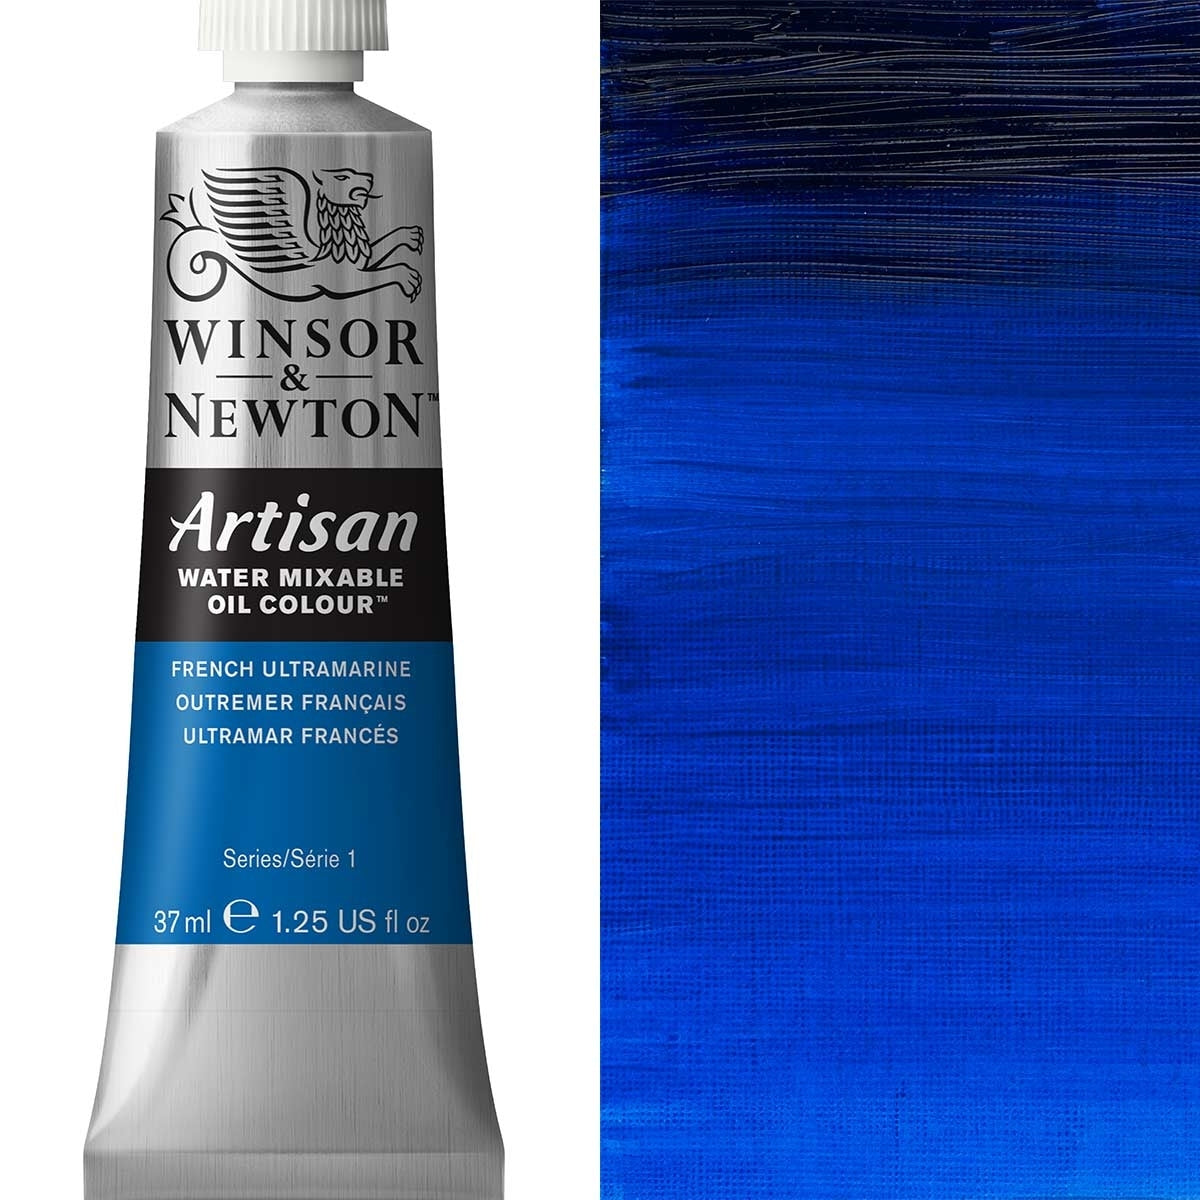 Winsor and Newton - Artisan Oil Colour Watermixable - 37ml - French Ultramarine